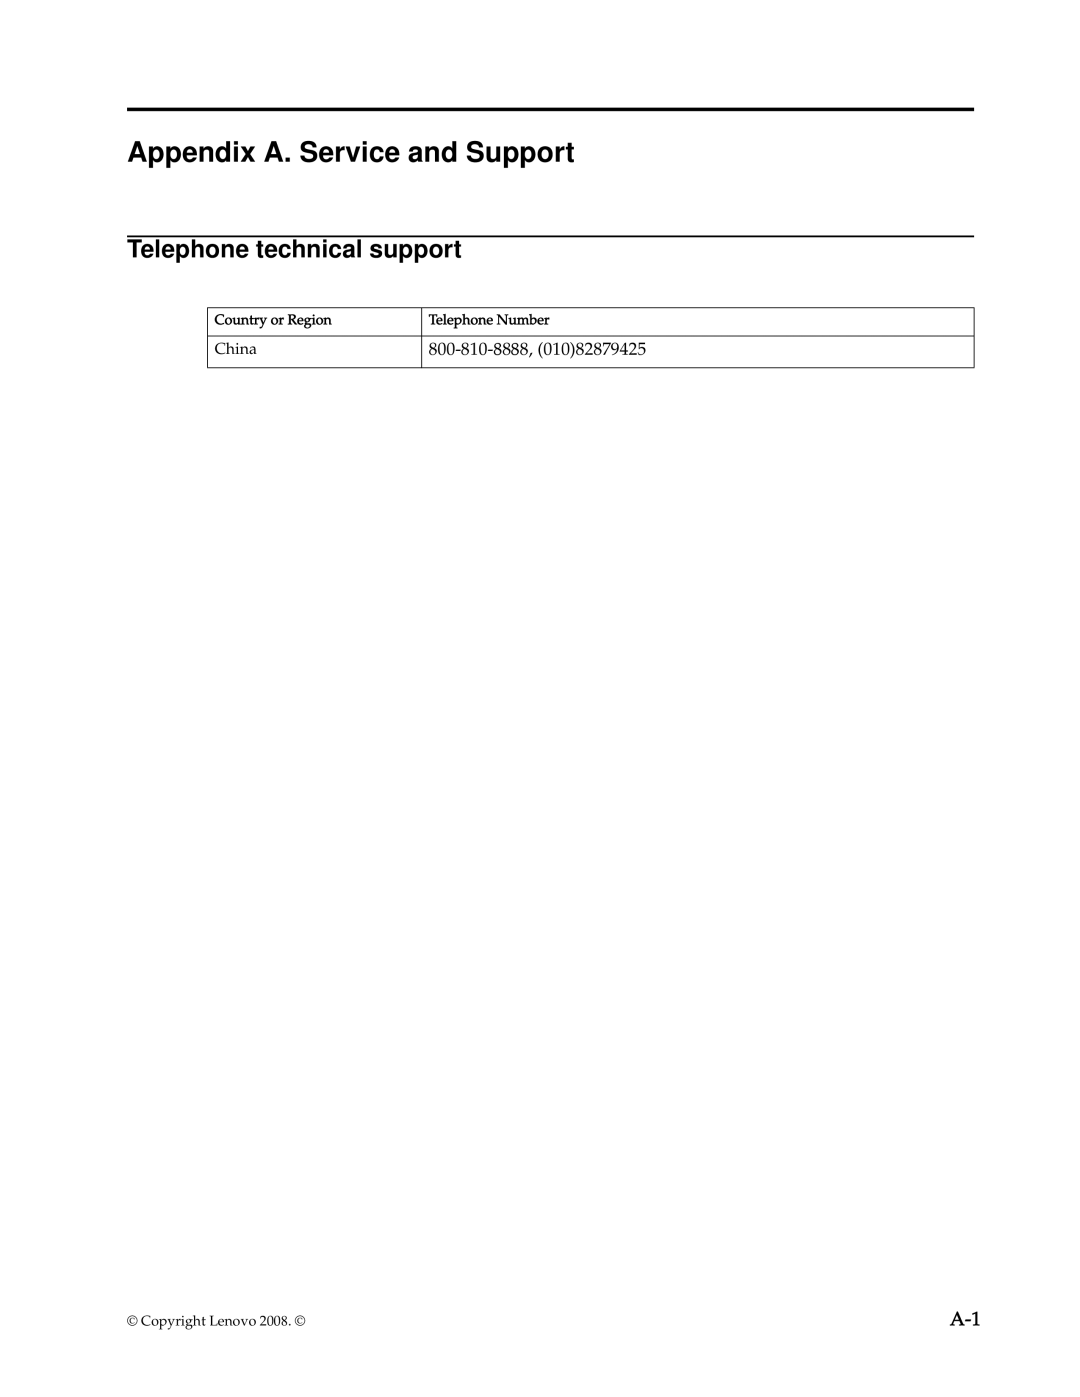 Lenovo 4432-HF1 manual Appendix A. Service and Support, Telephone technical support, Country or Region, Telephone Number 